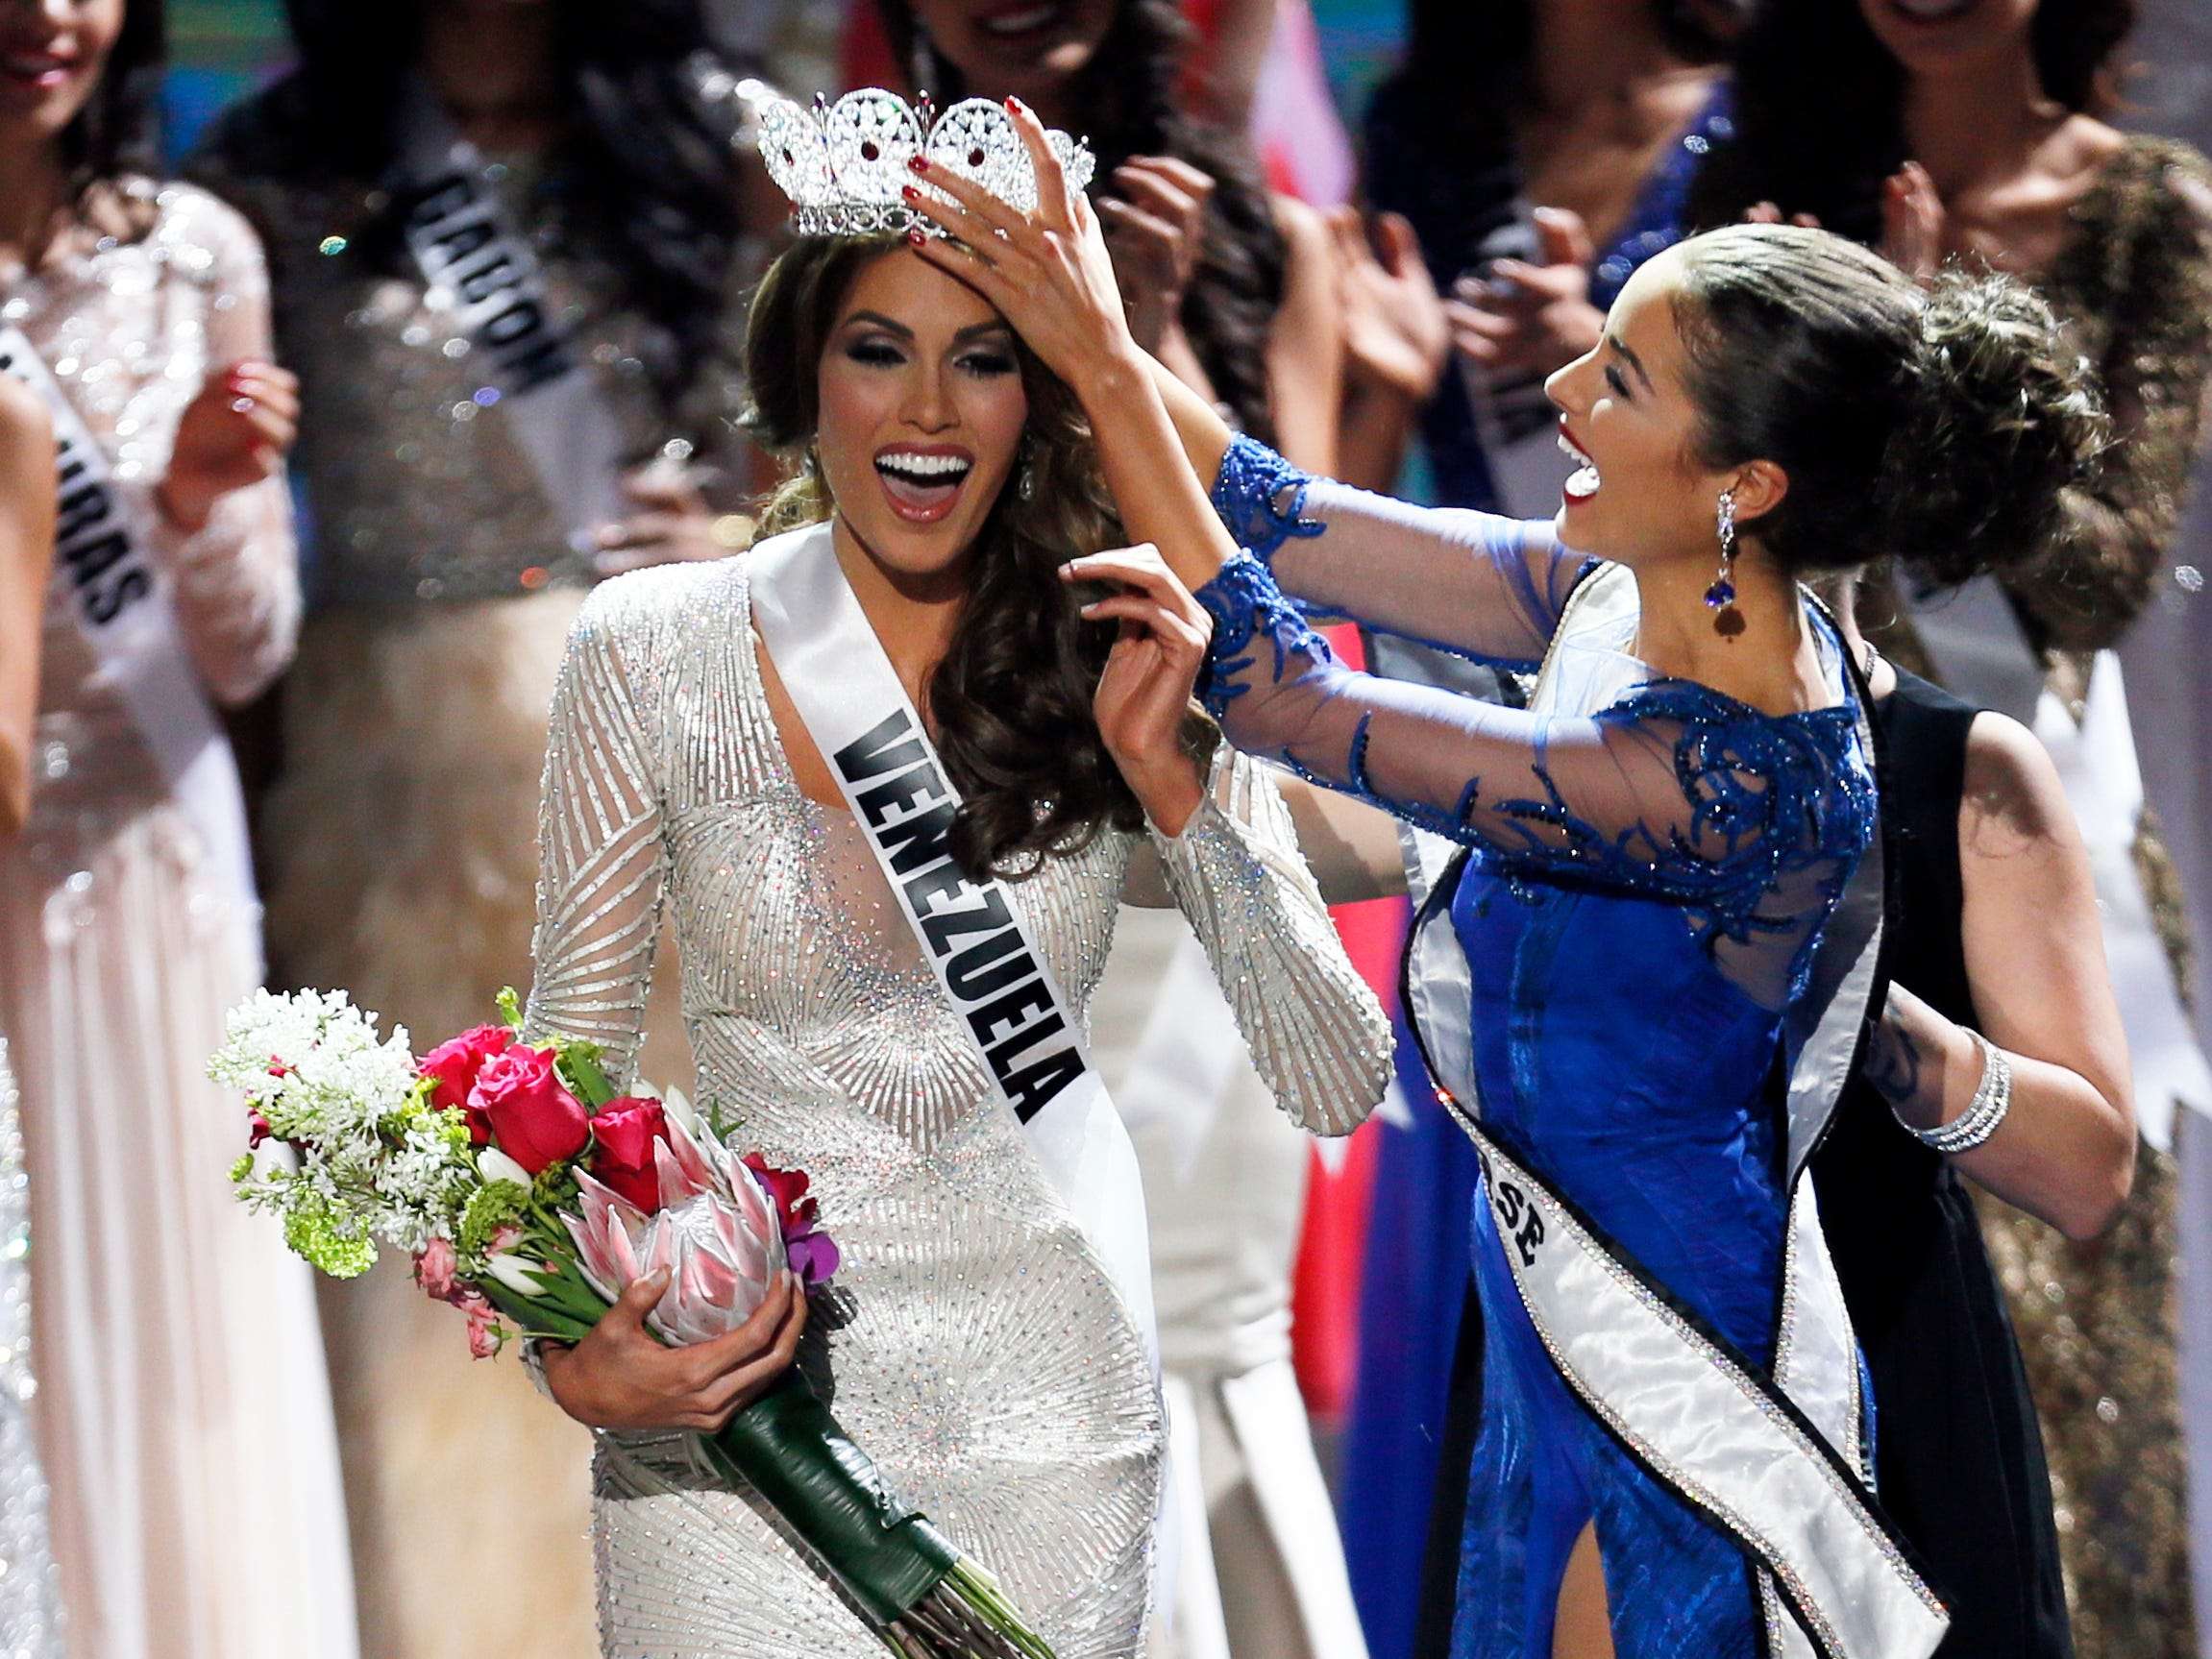 These 6 countries have produced the most Miss Universe winners